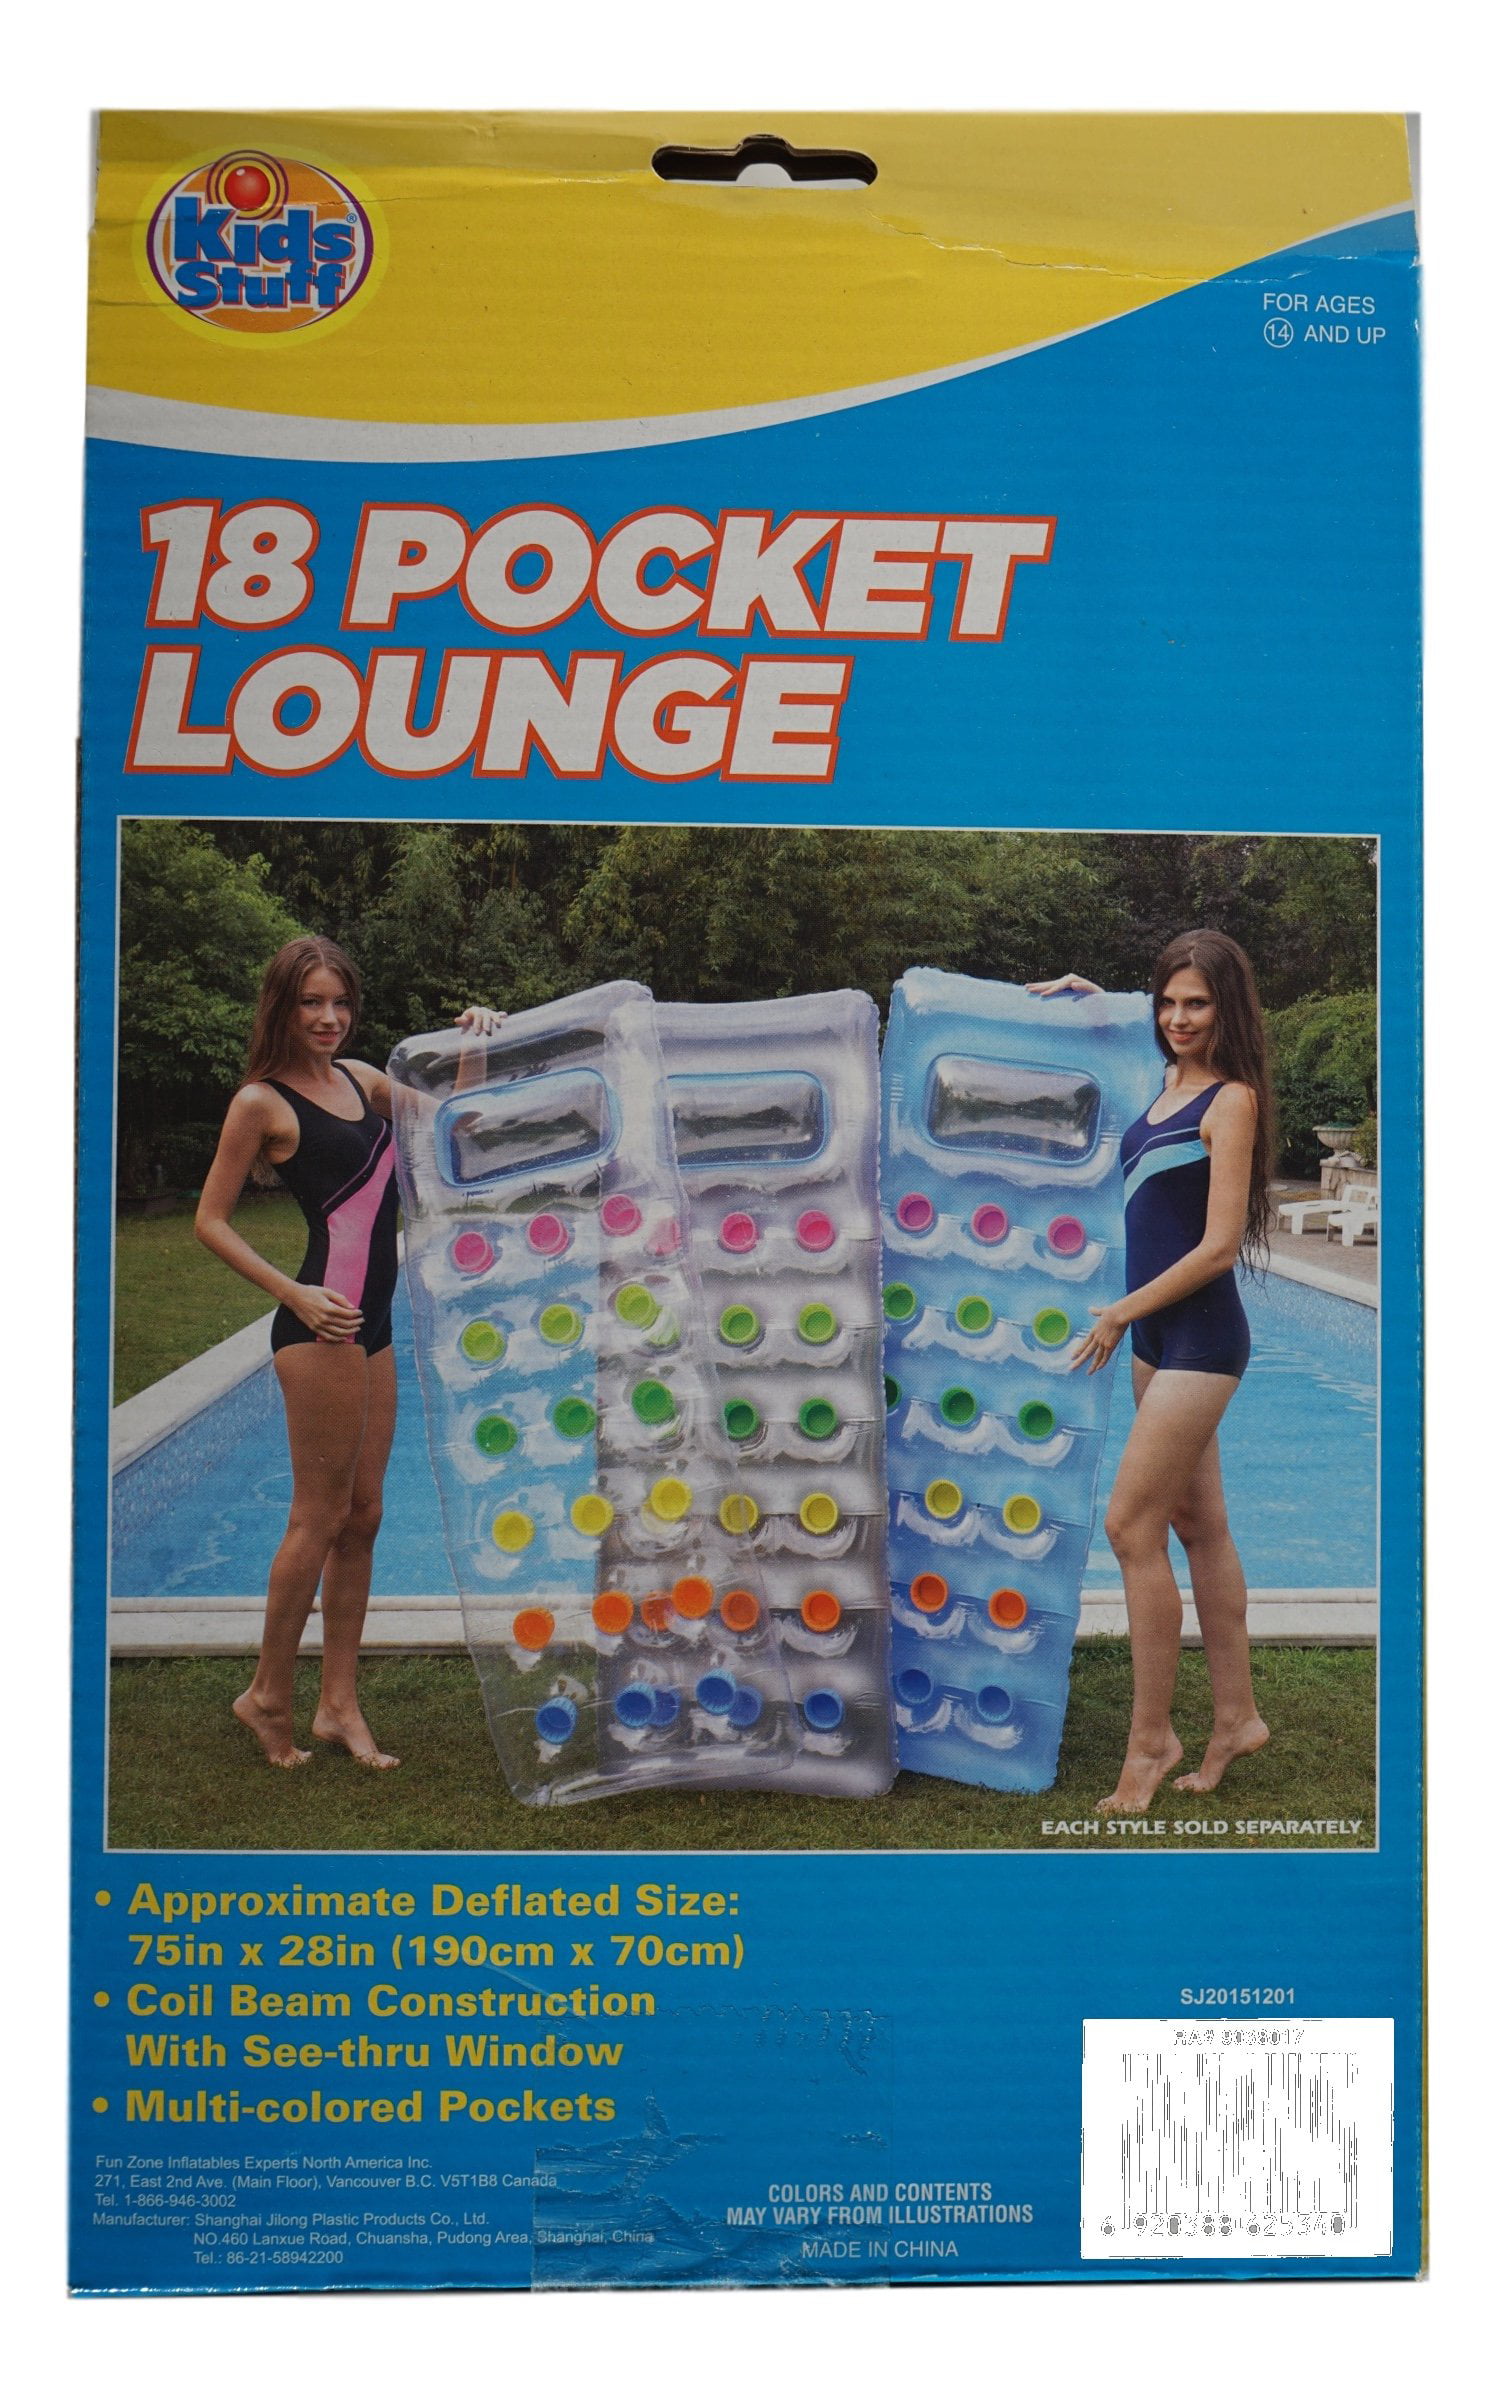 18 Pocket Lounge Raft For Pool by Kids Stuff Coil Beam 75" x 28"